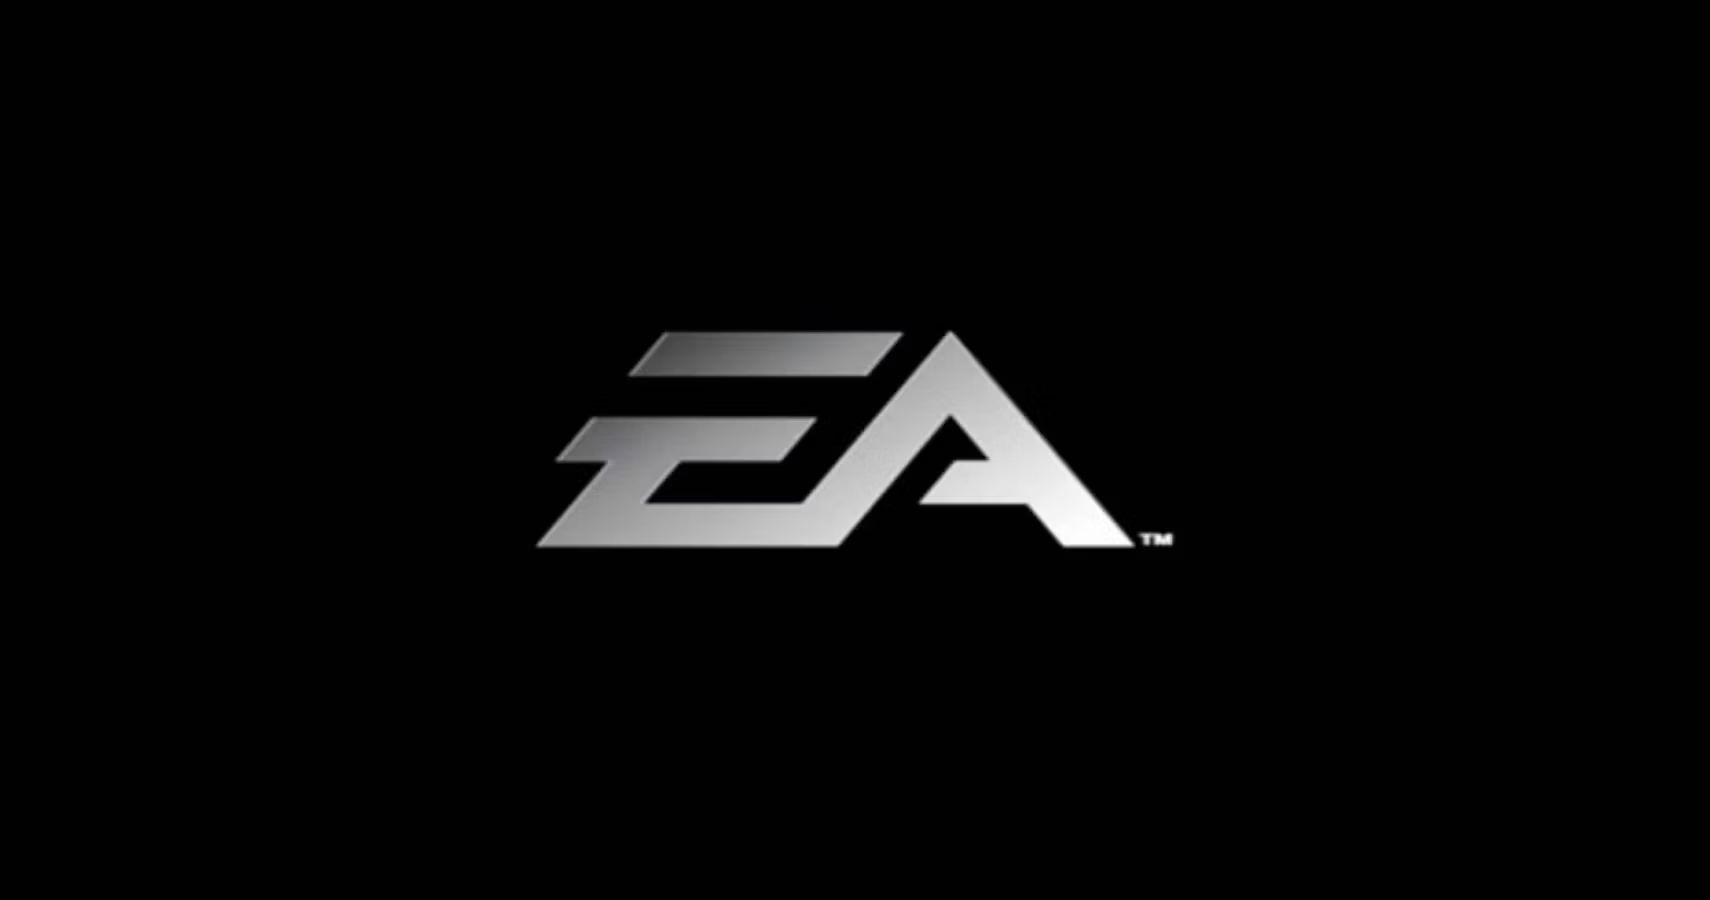 ea<span style='color:red;'>账号</span><span style='color:red;'>怎么</span><span style='color:red;'>注册</span> 新手保姆级<span style='color:red;'>教程</span>完成ea<span style='color:red;'>账号</span><span style='color:red;'>注册</span>